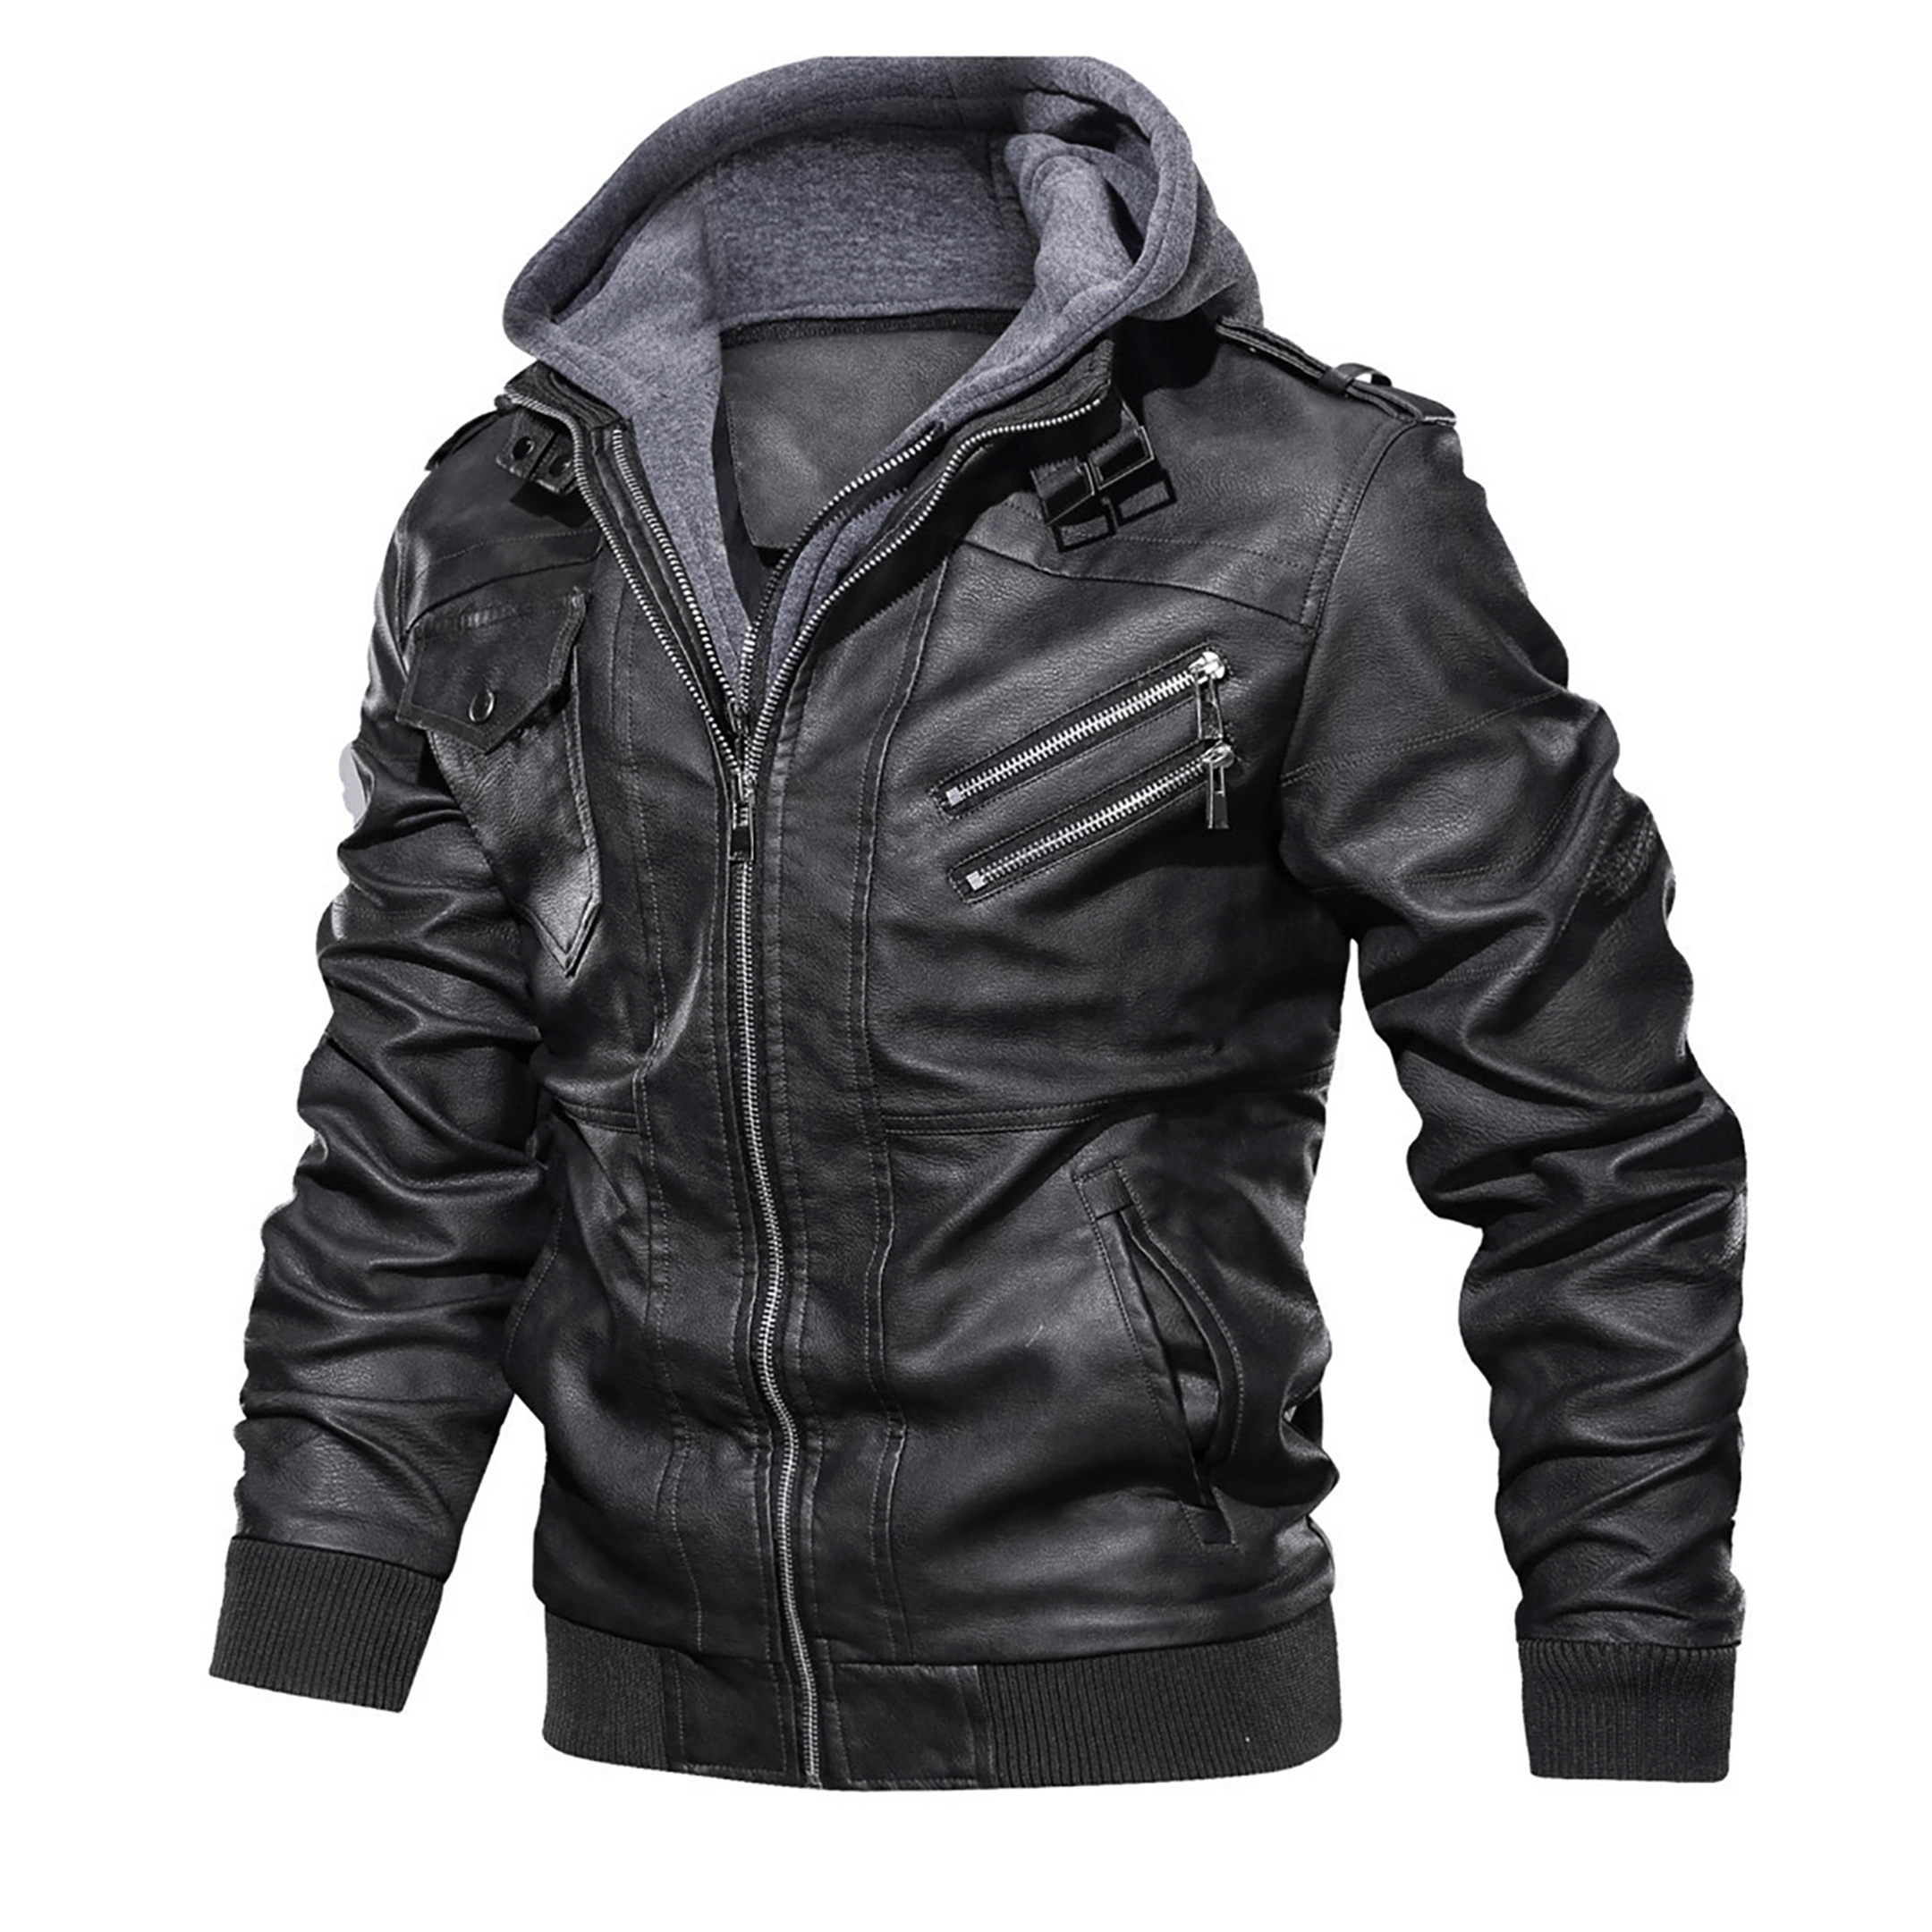 Top leather jackets and latest products 261